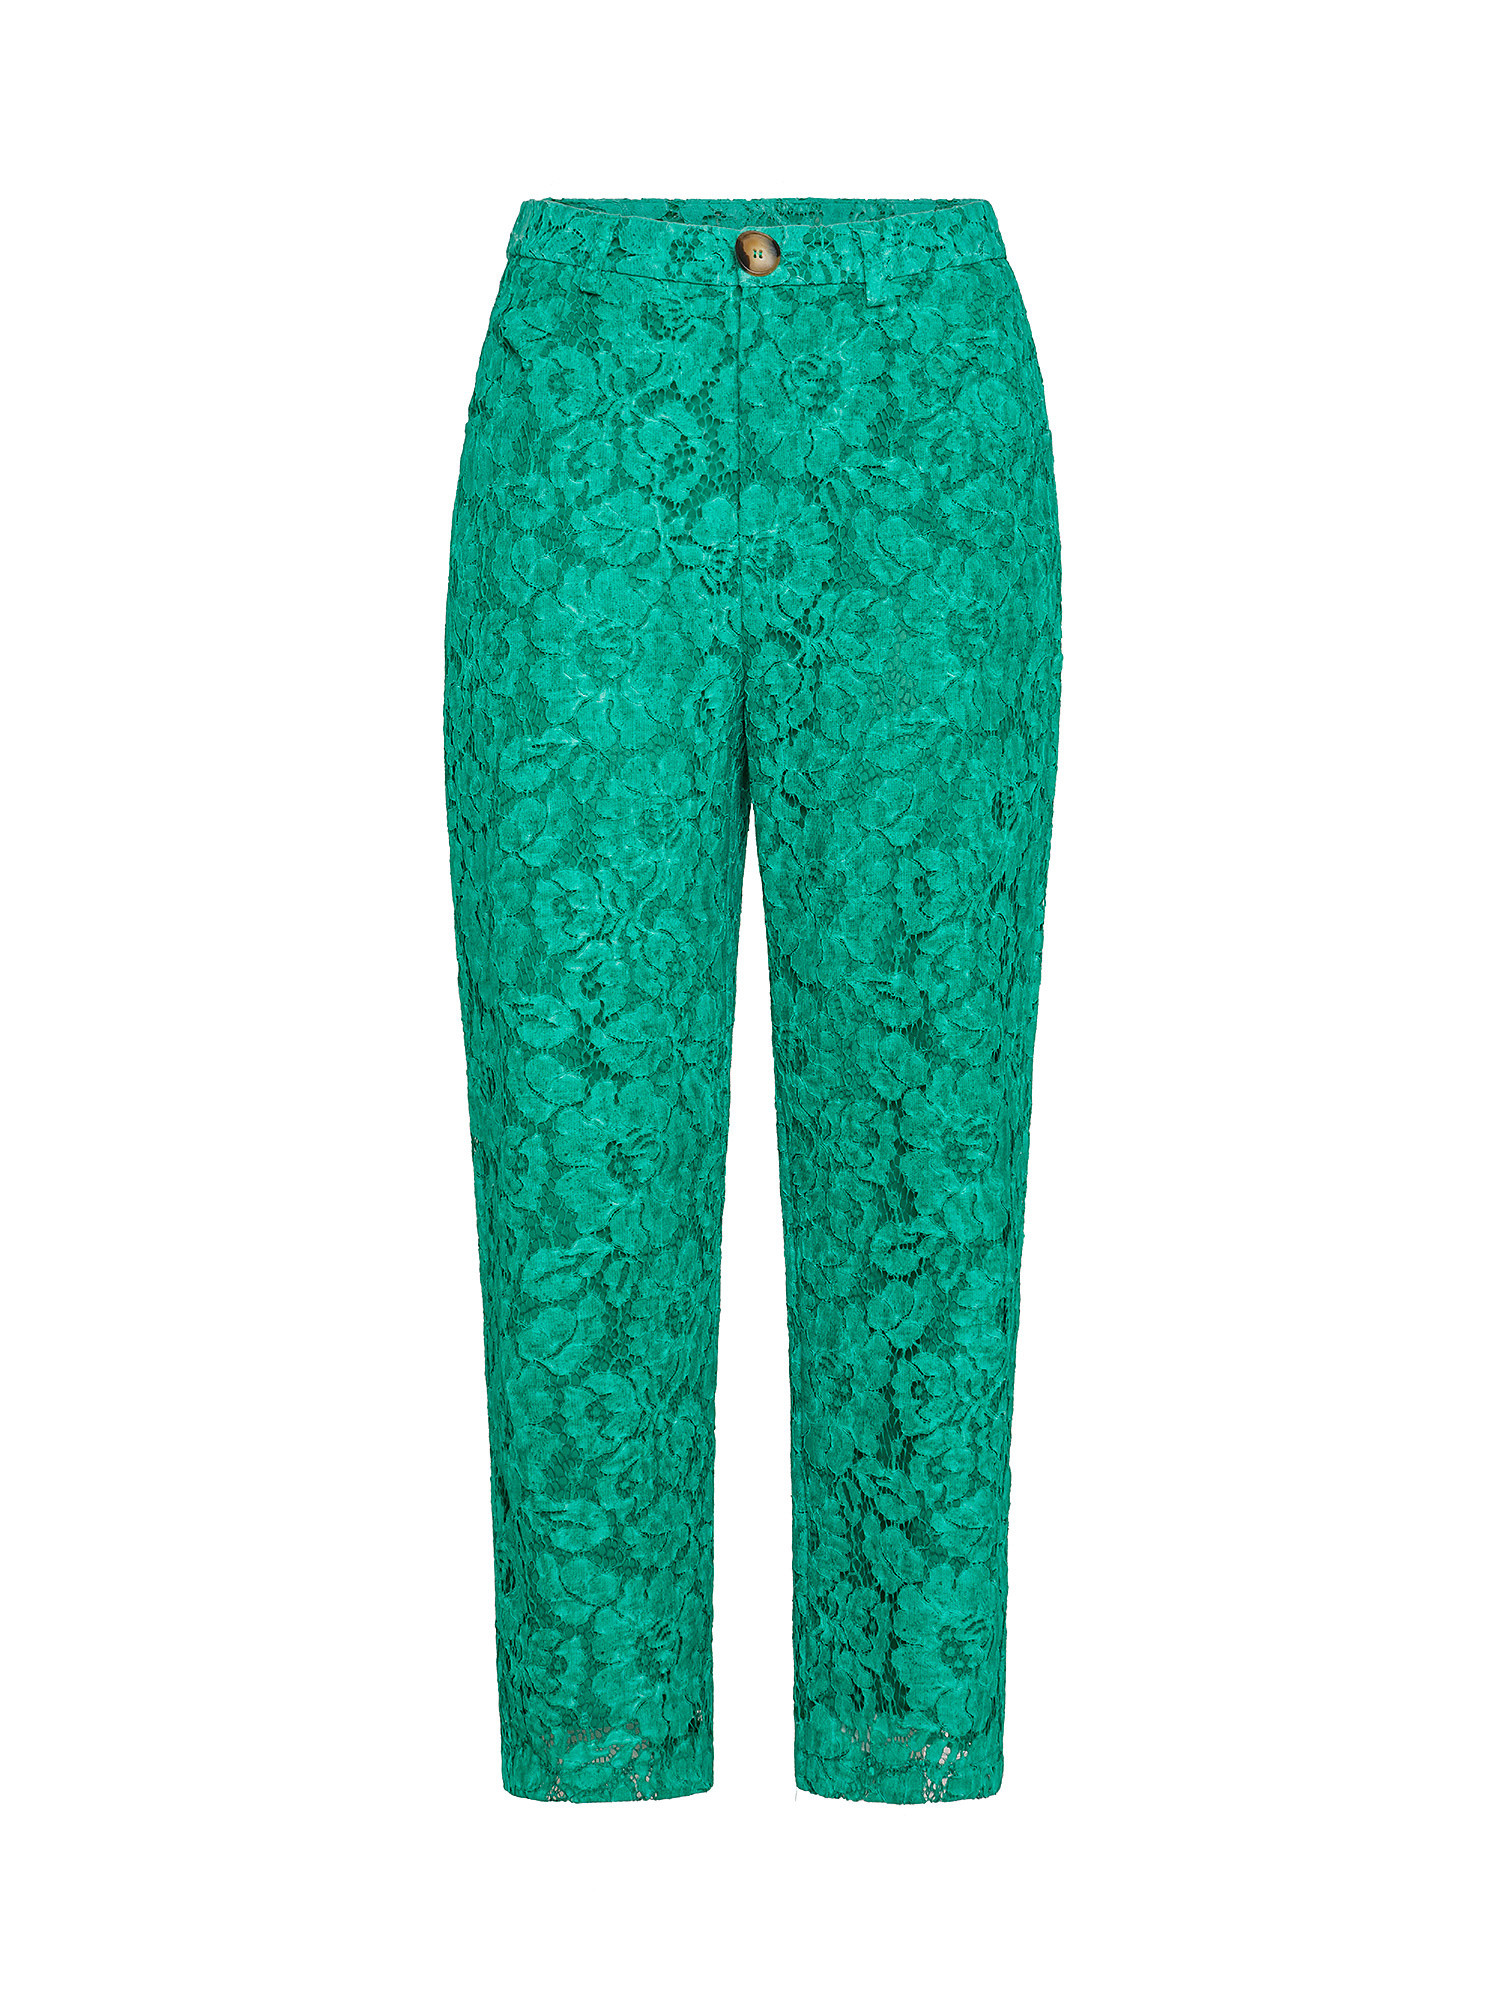 Trousers, Green, large image number 0